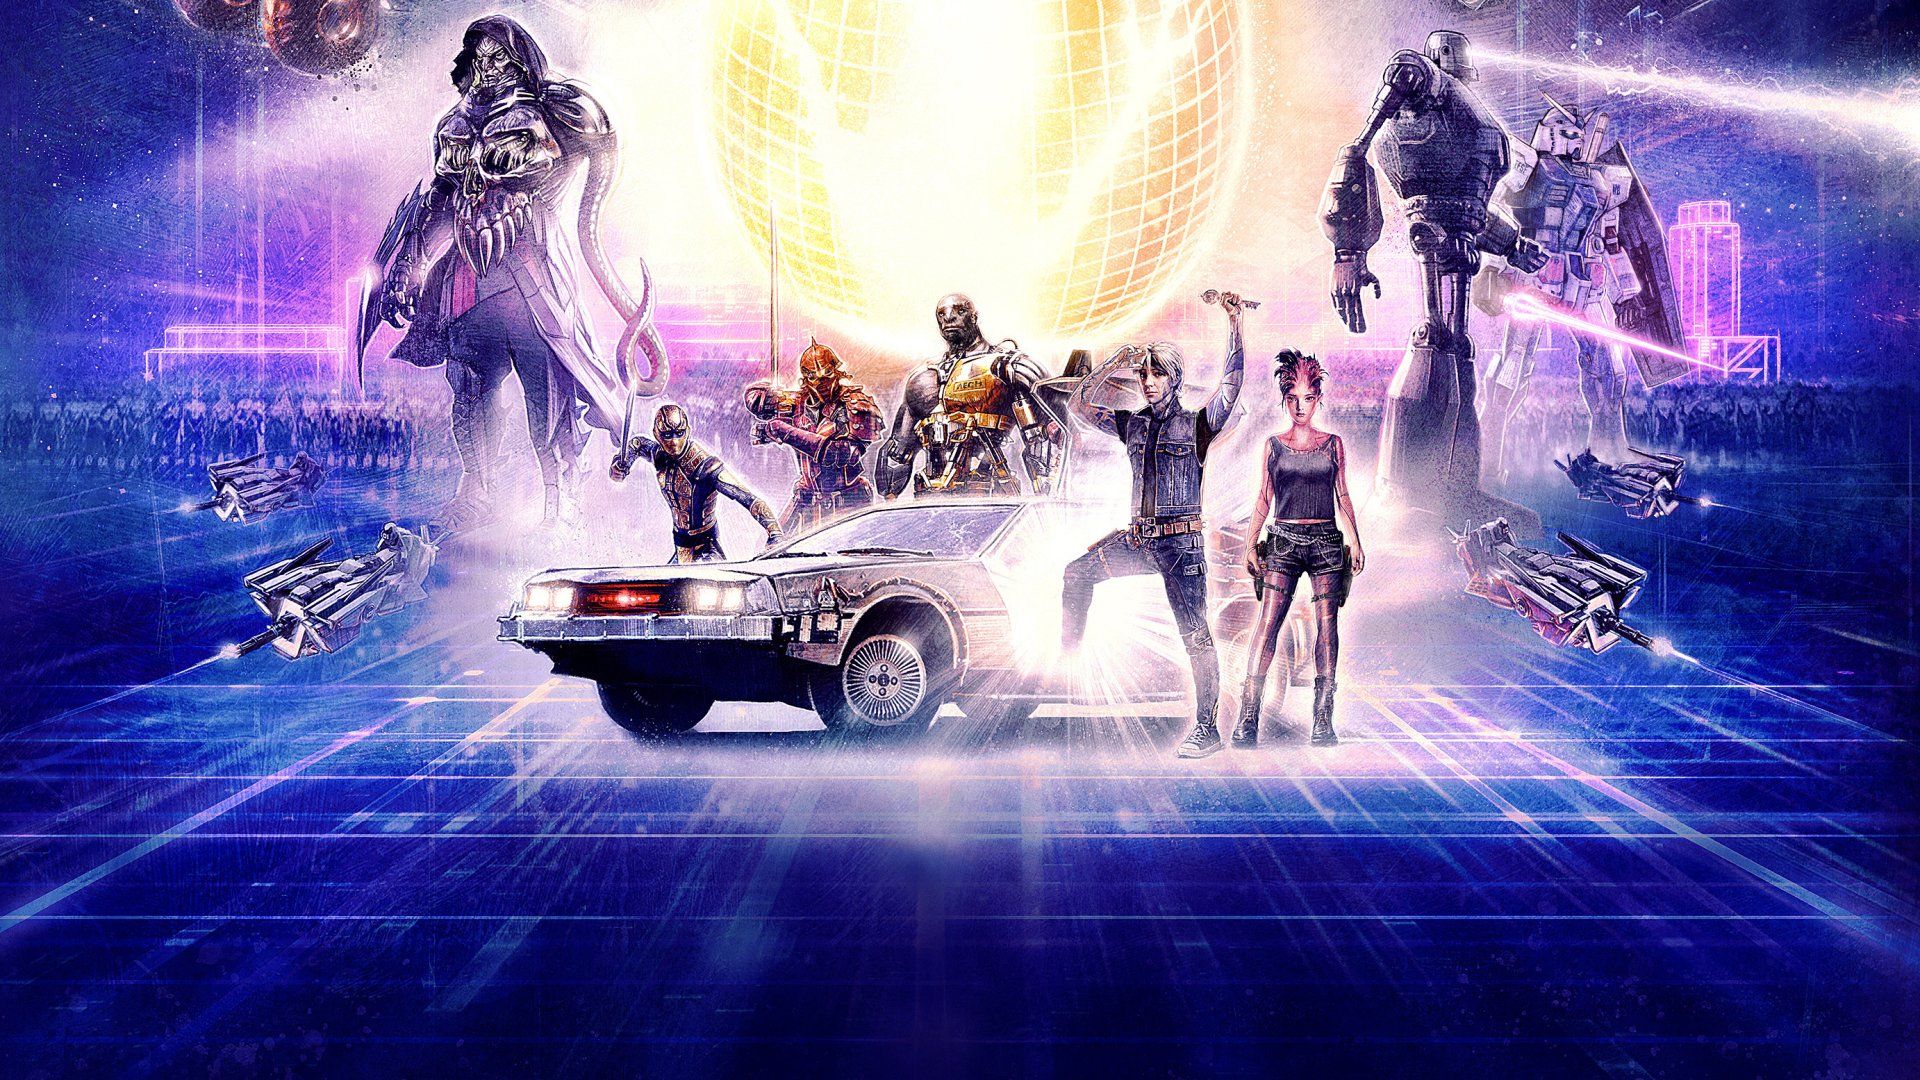 Ready Player One International Poster Wallpapers